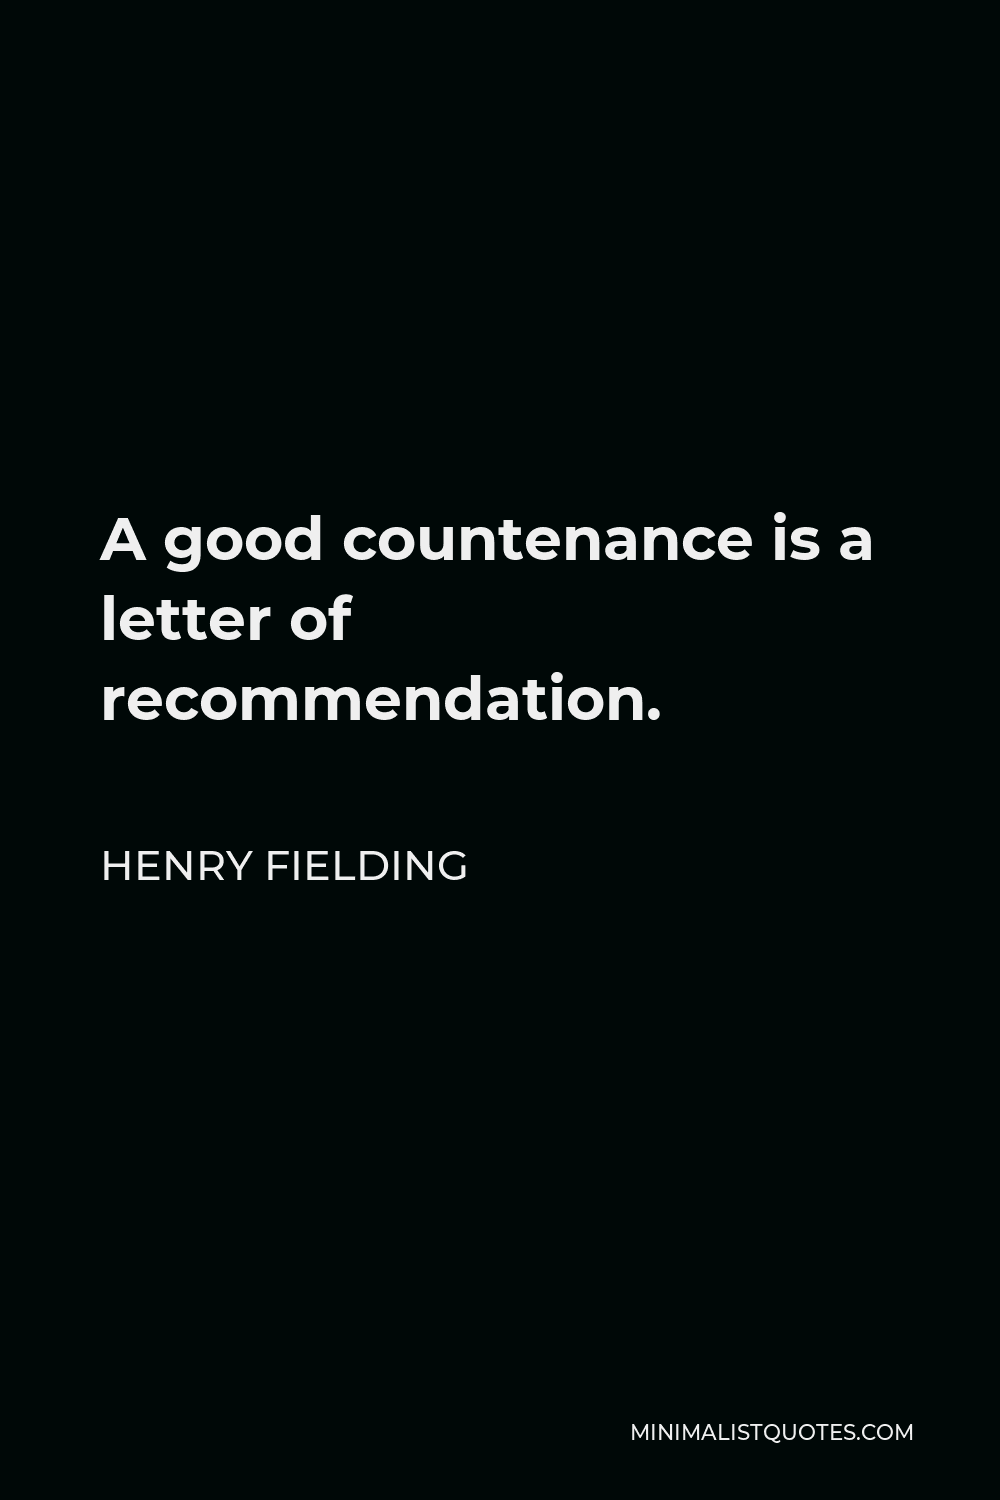 Henry Fielding Quote - A good countenance is a letter of recommendation.